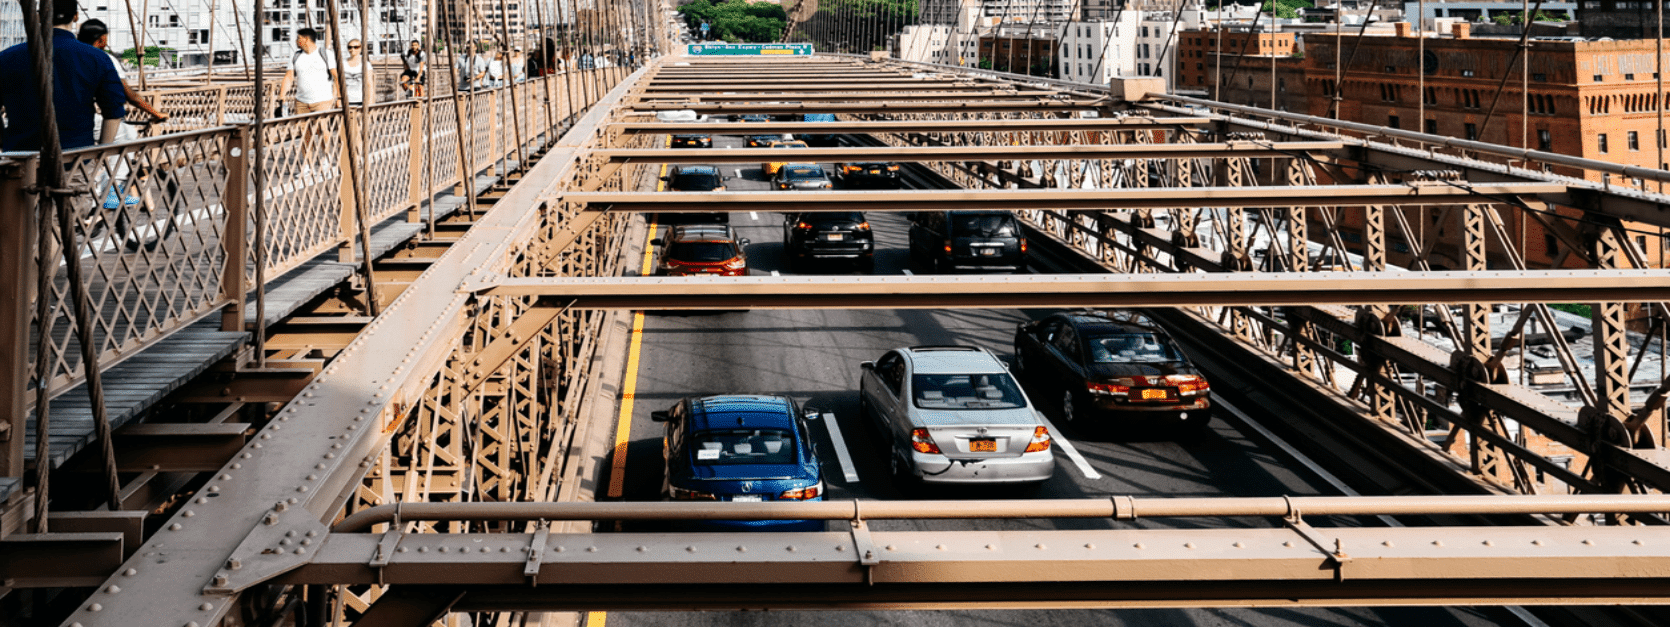 WHY DOES BROOKLYN HAVE THE HIGHEST NUMBER OF CAR ACCIDENTS IN NEW YORK CITY